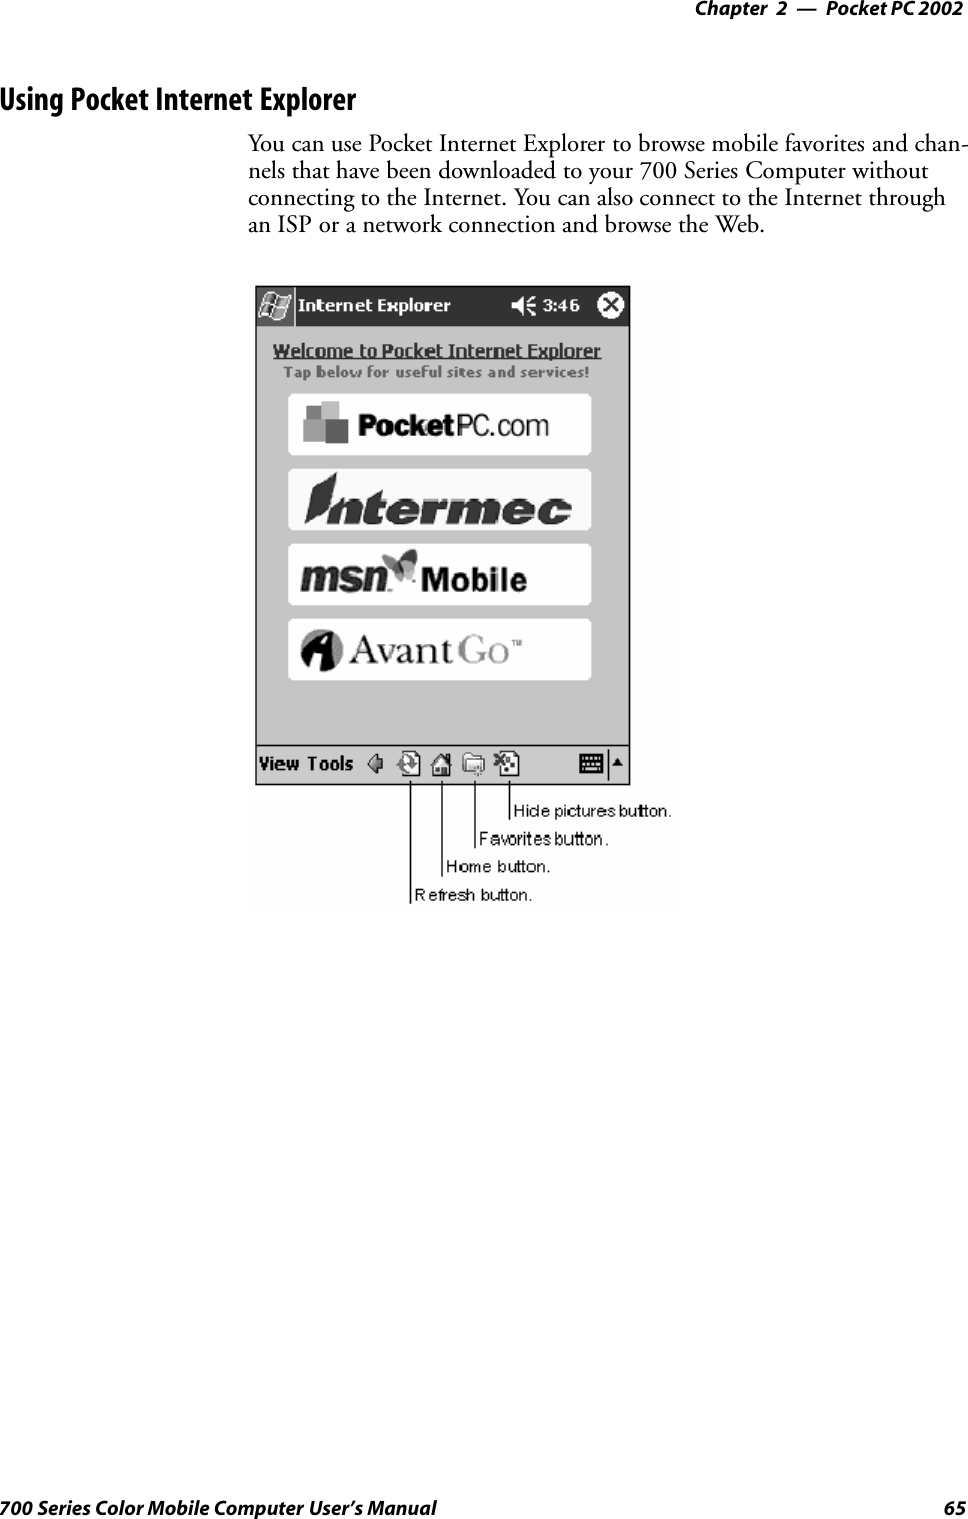 Pocket PC 2002—Chapter 265700 Series Color Mobile Computer User’s ManualUsing Pocket Internet ExplorerYou can use Pocket Internet Explorer to browse mobile favorites and chan-nels that have been downloaded to your 700 Series Computer withoutconnecting to the Internet. You can also connect to the Internet throughan ISP or a network connection and browse the Web.